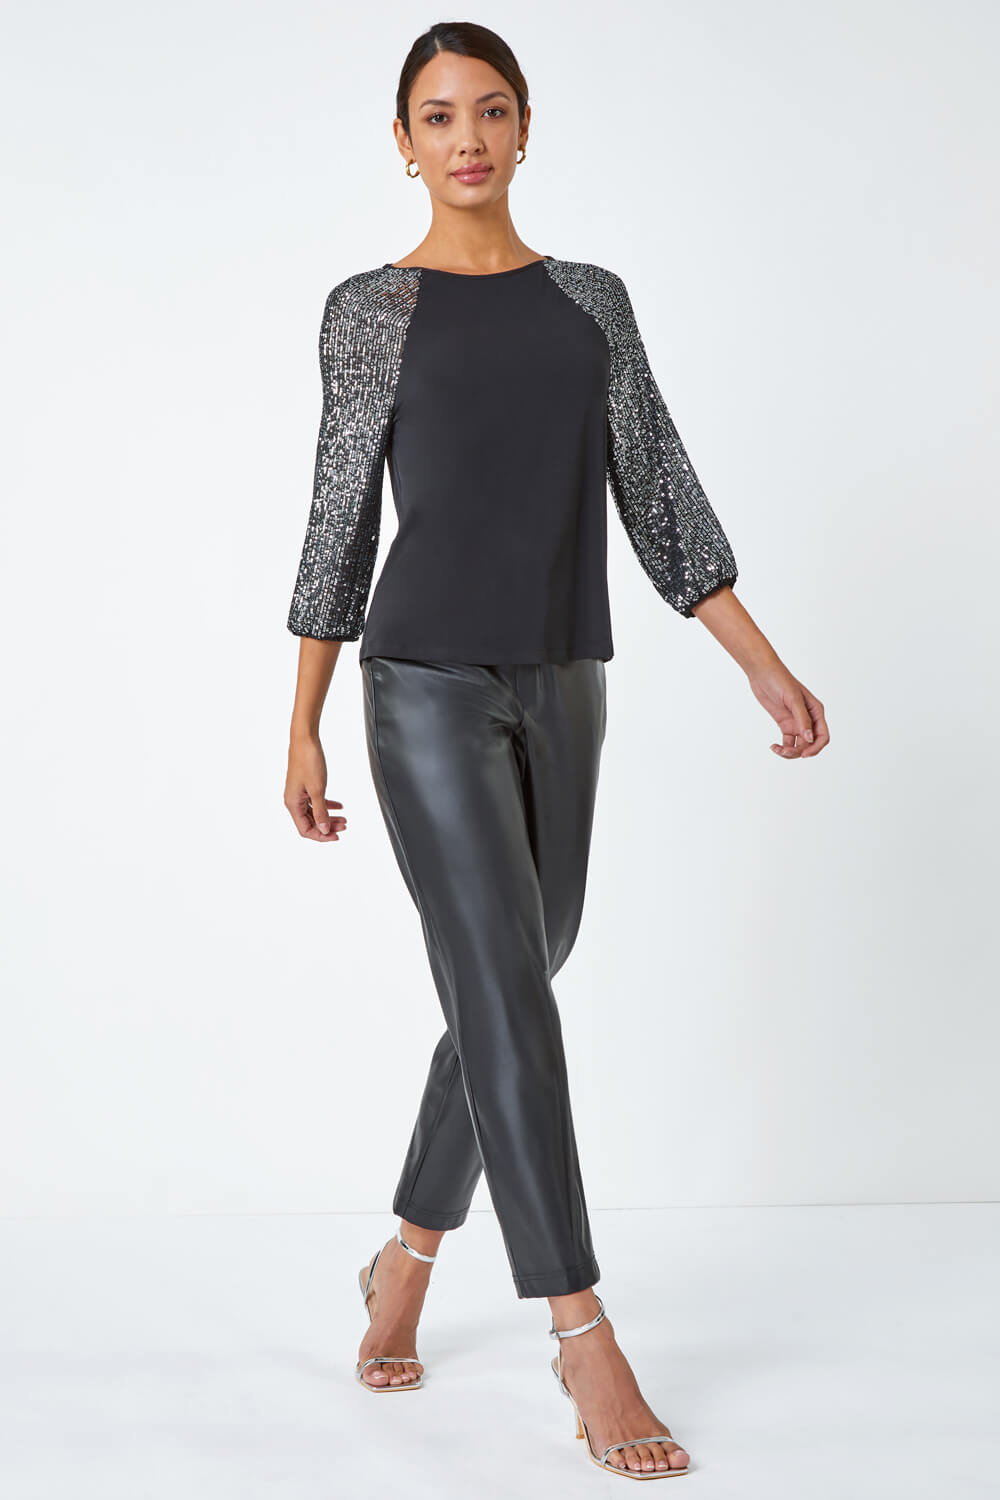 Silver Sequin Sleeve Stretch Jersey Top, Image 2 of 5